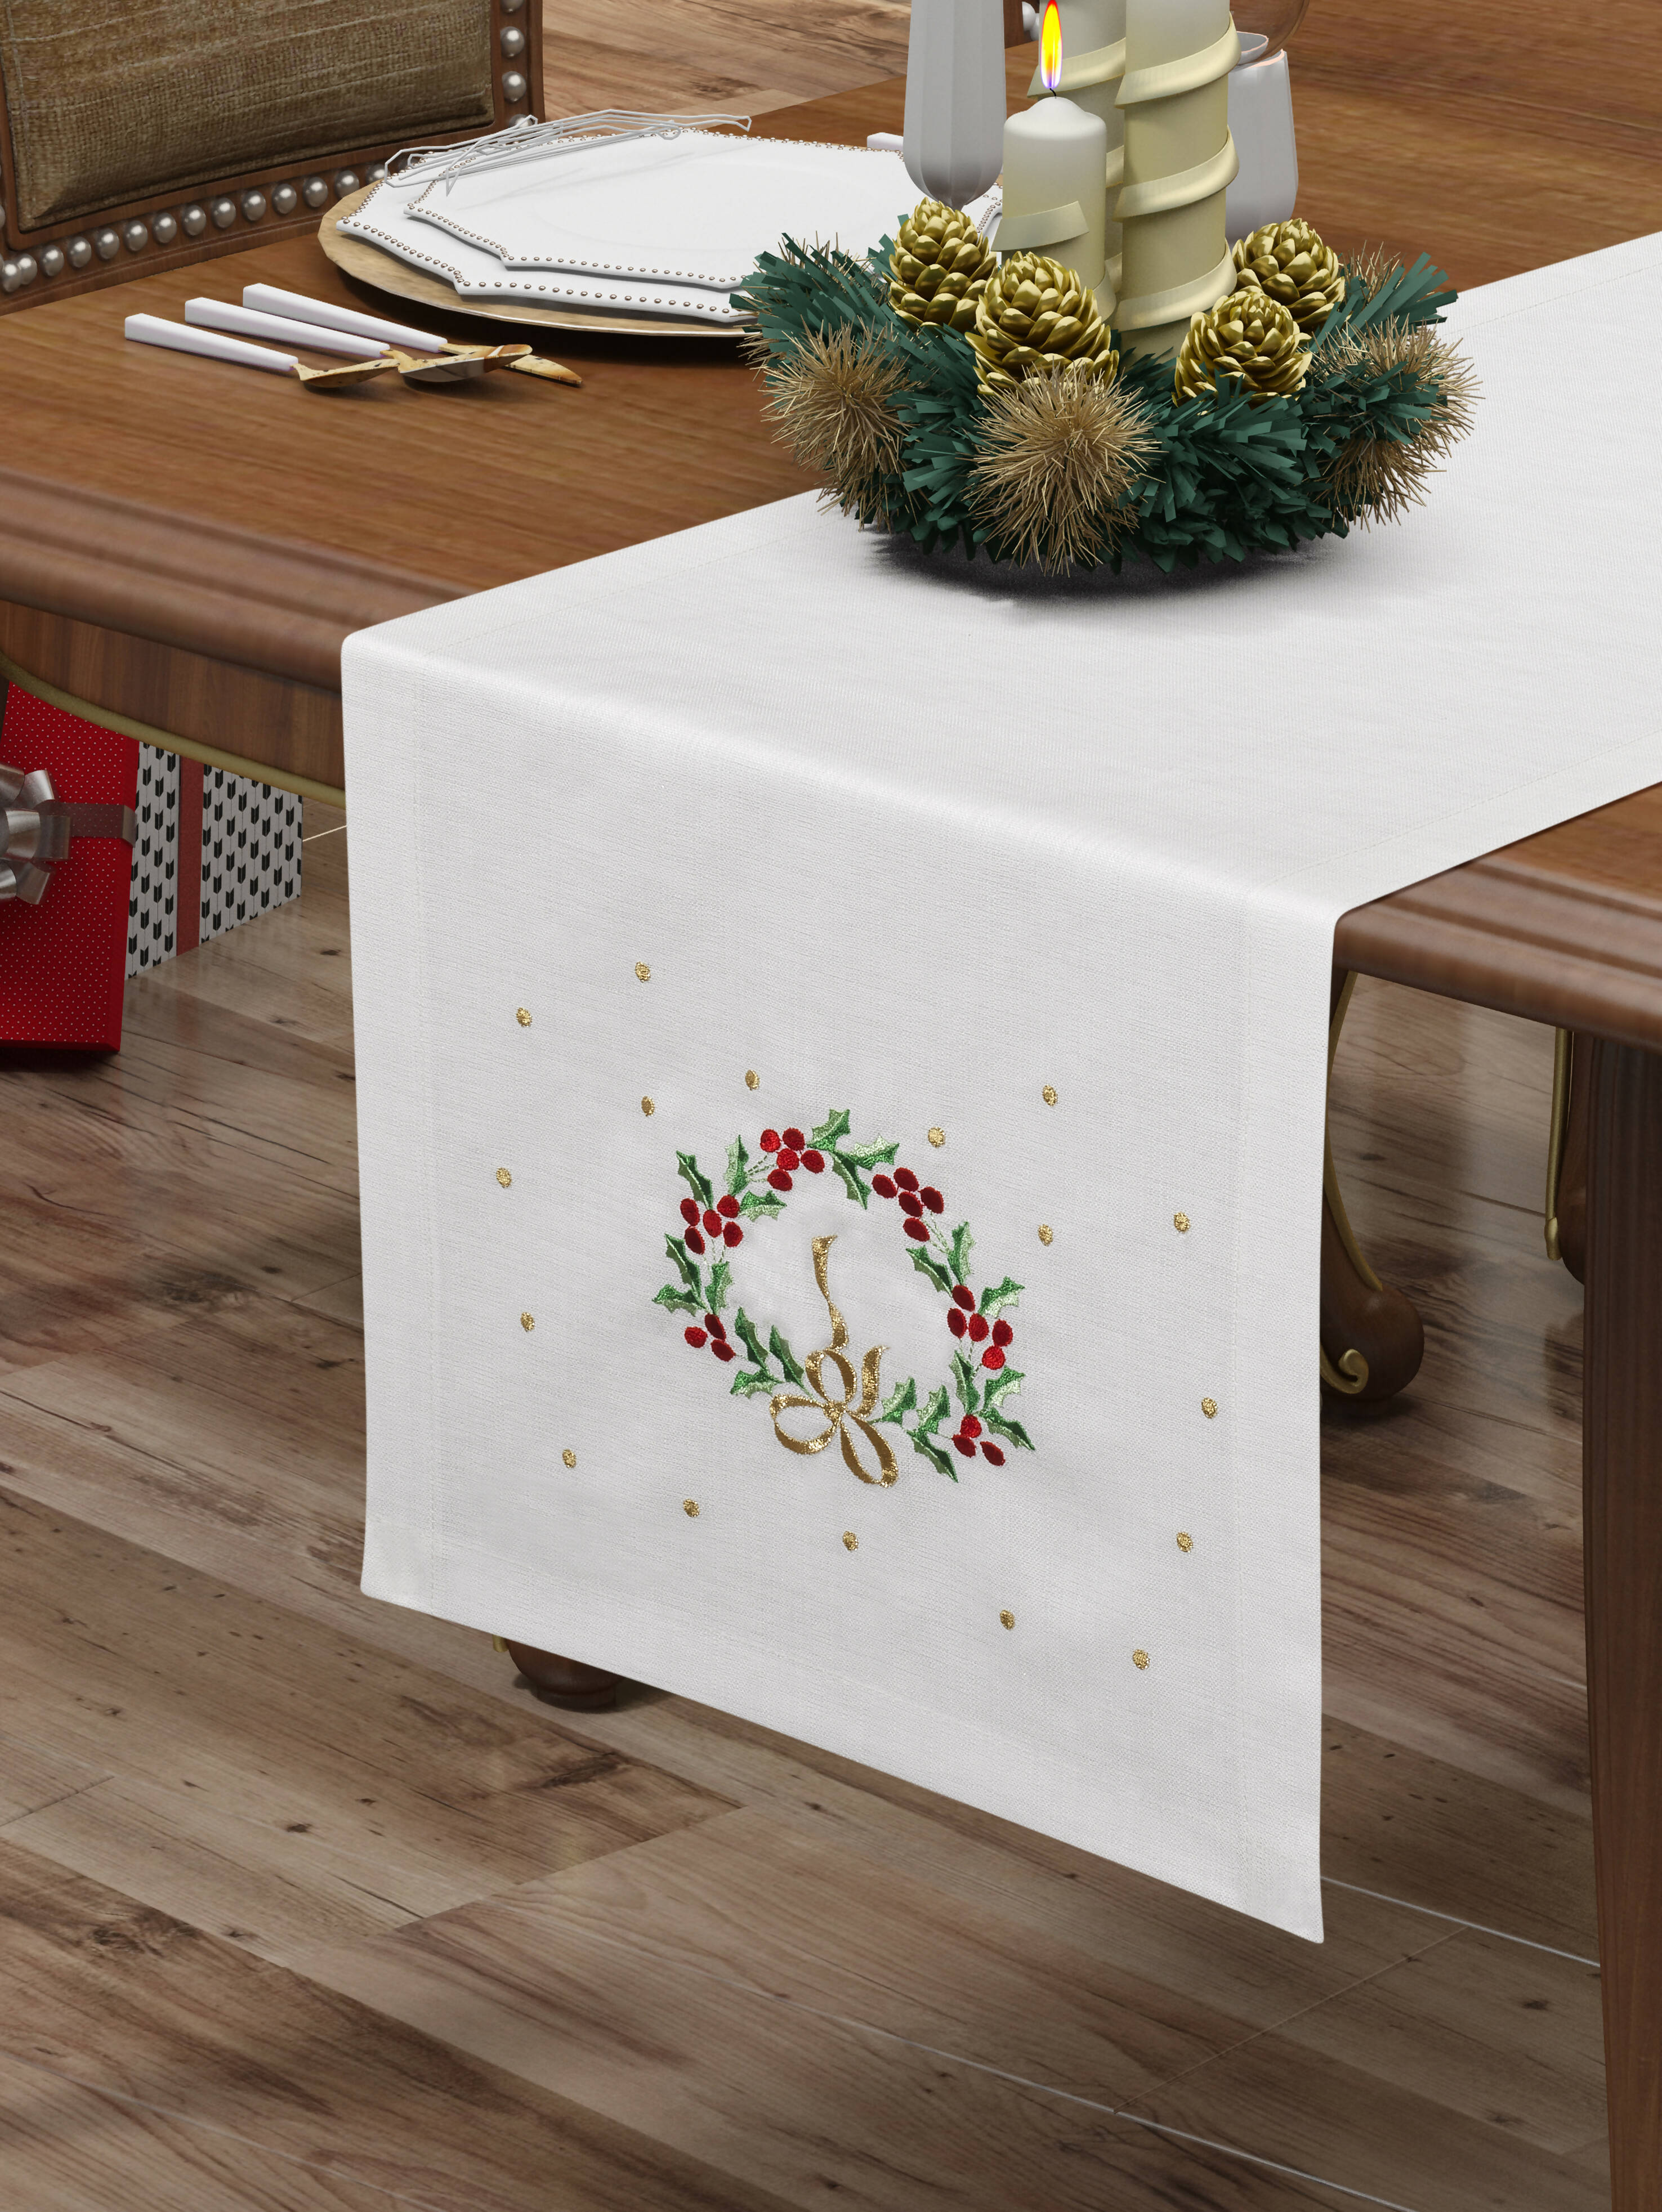 Christmas and Holiday Table Runners - Great for Holiday Decorating - Wear Sierra